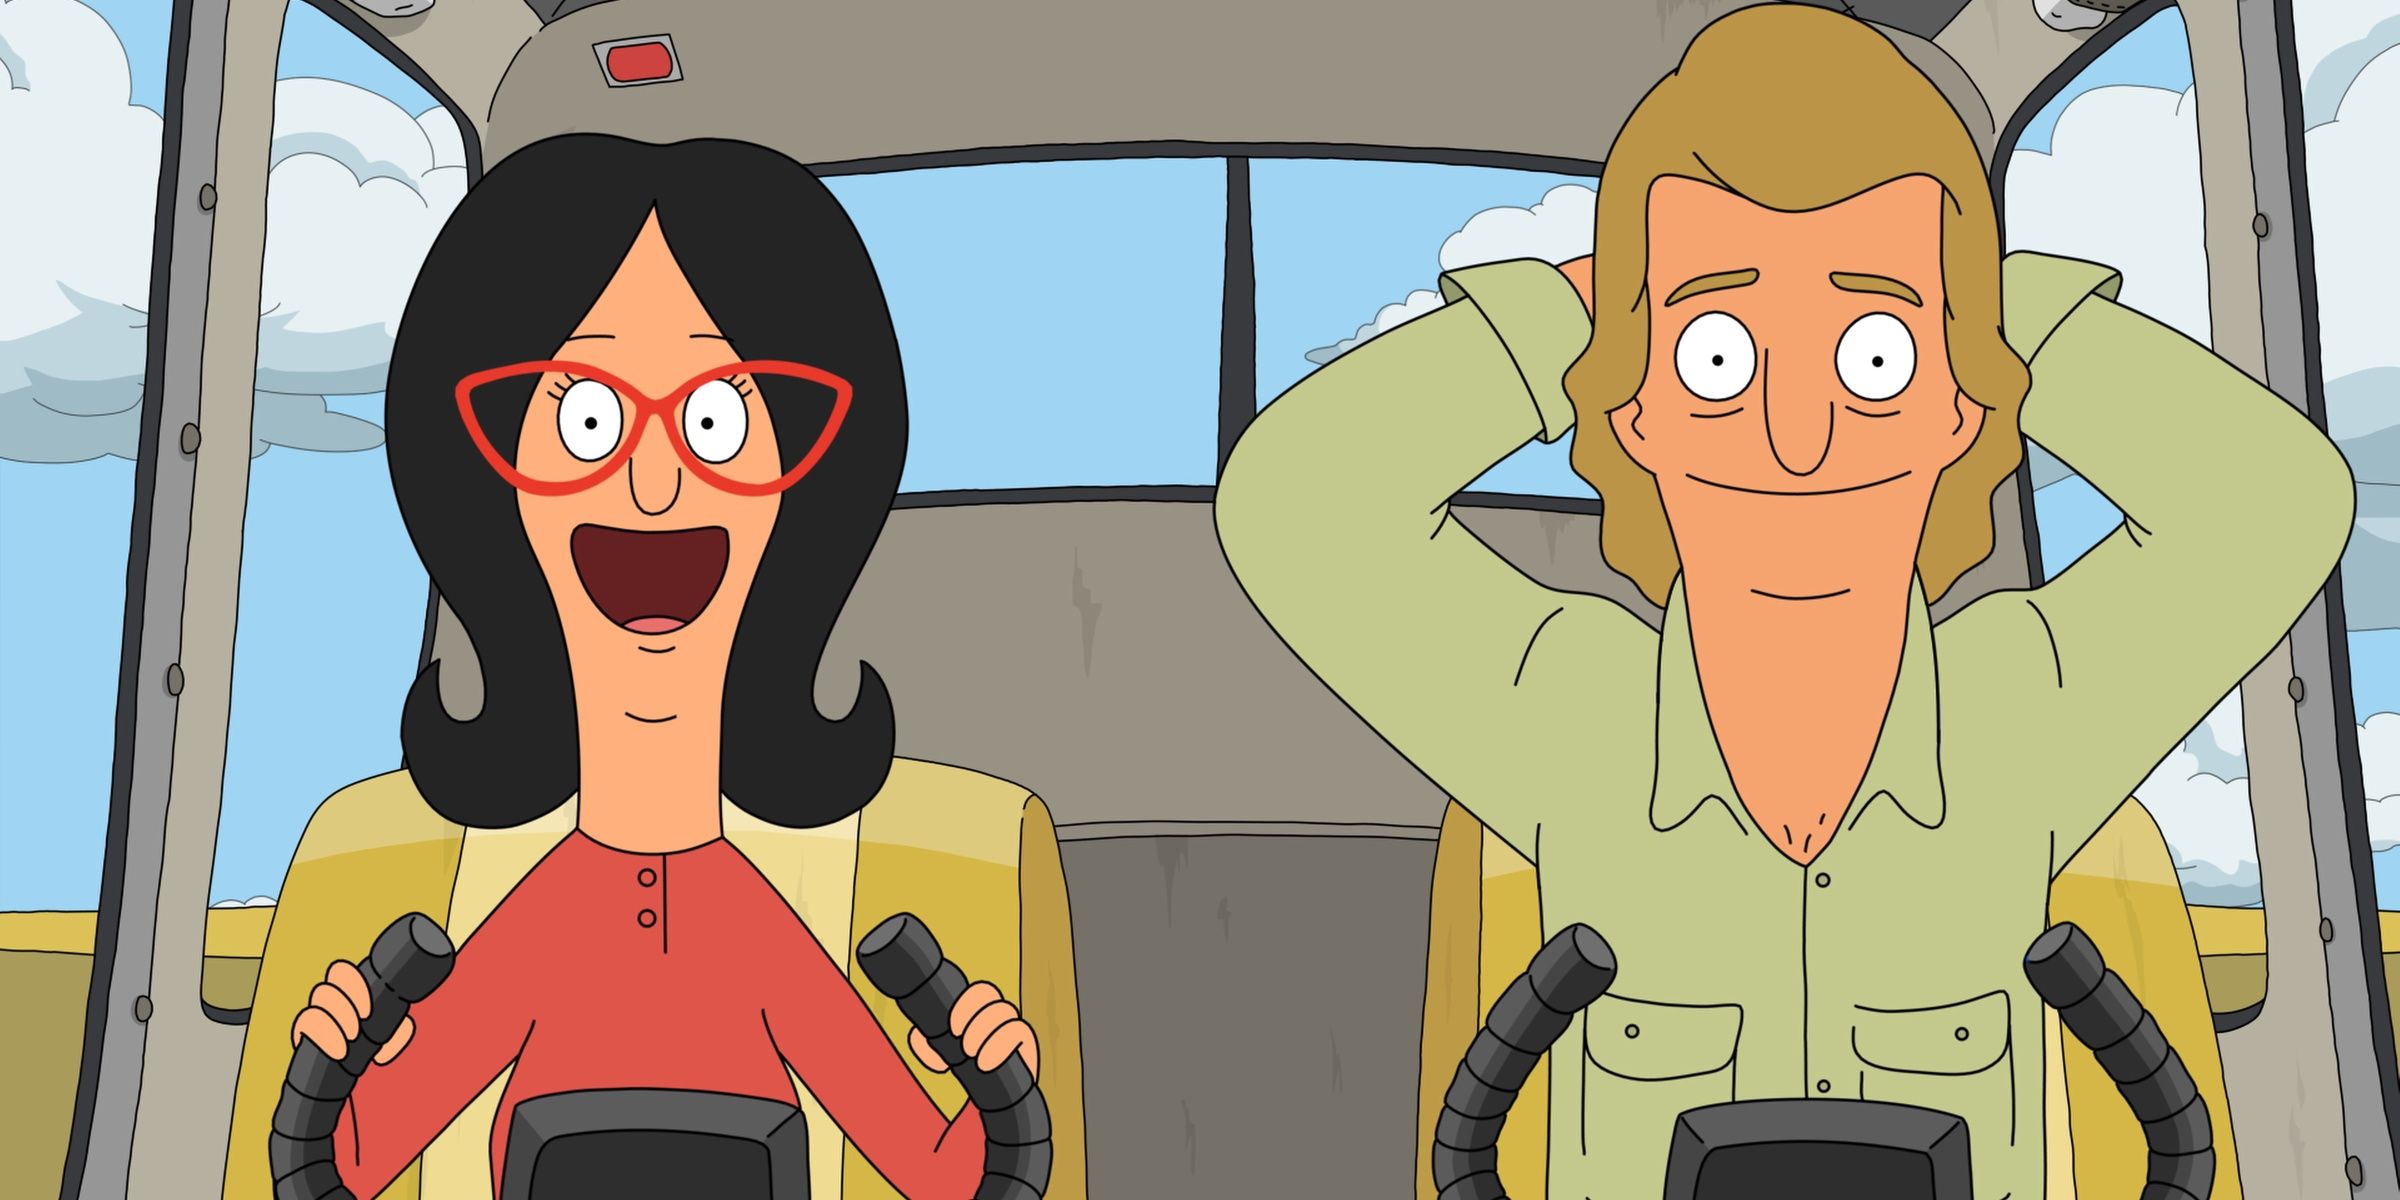 Linda excitedly flies an airplane from bob's Burgers 